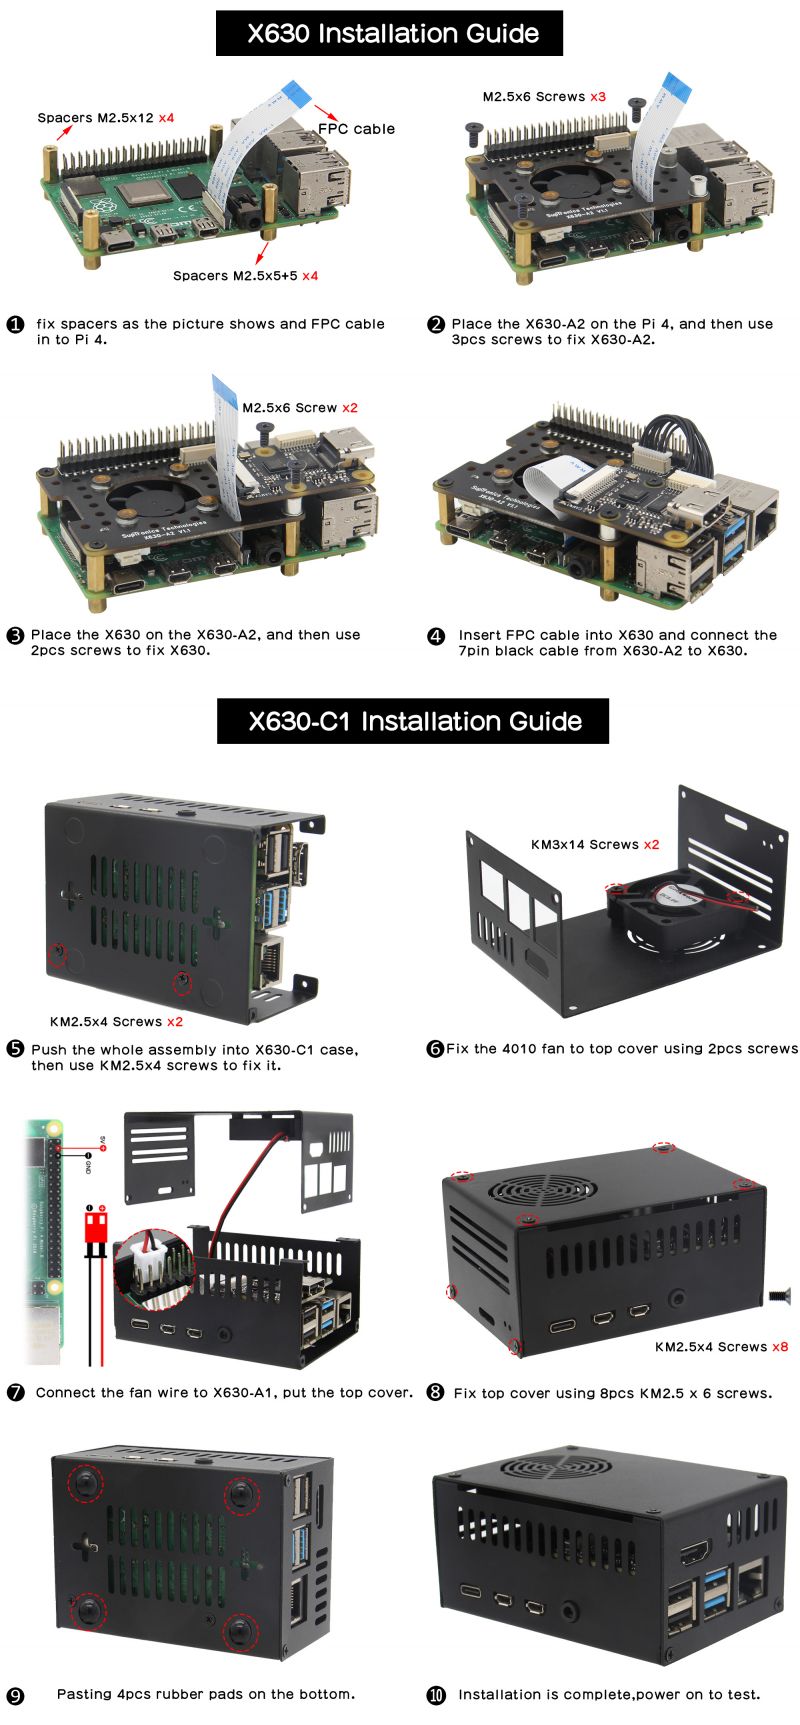 How to install X630/X630-A2/X630-C1